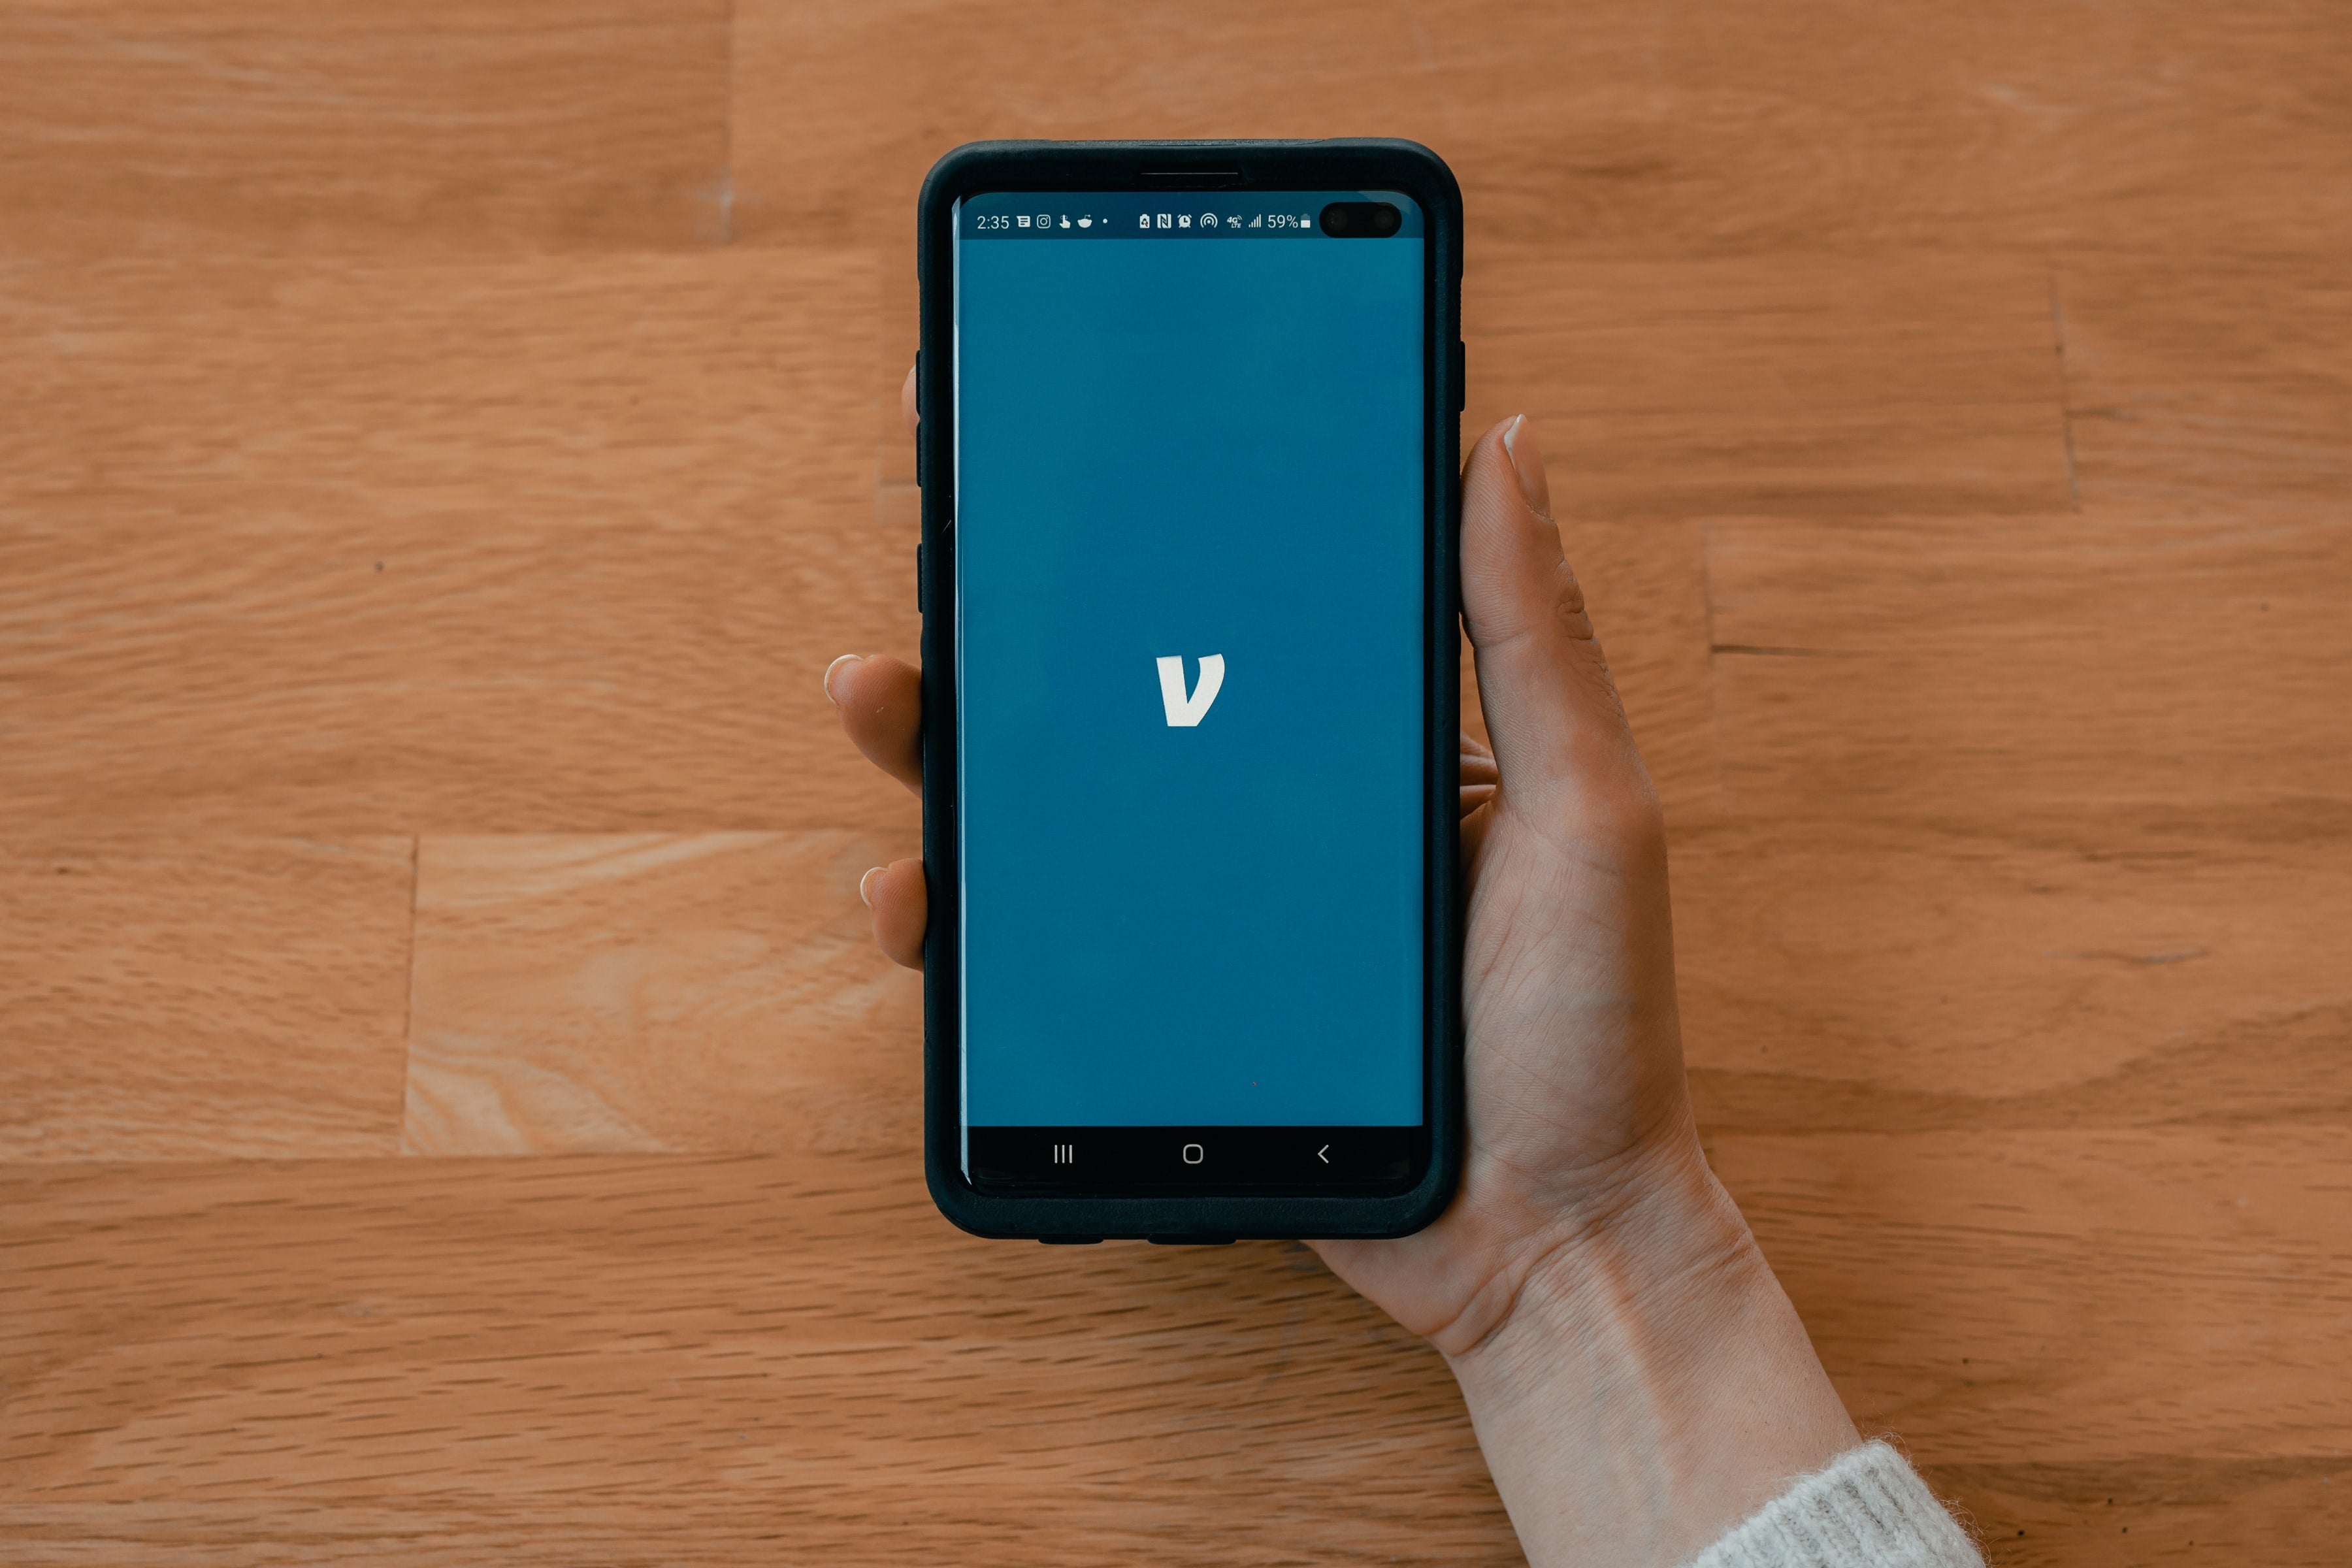 A hand holding a black Samsung smart phone showing the Venmo logo.